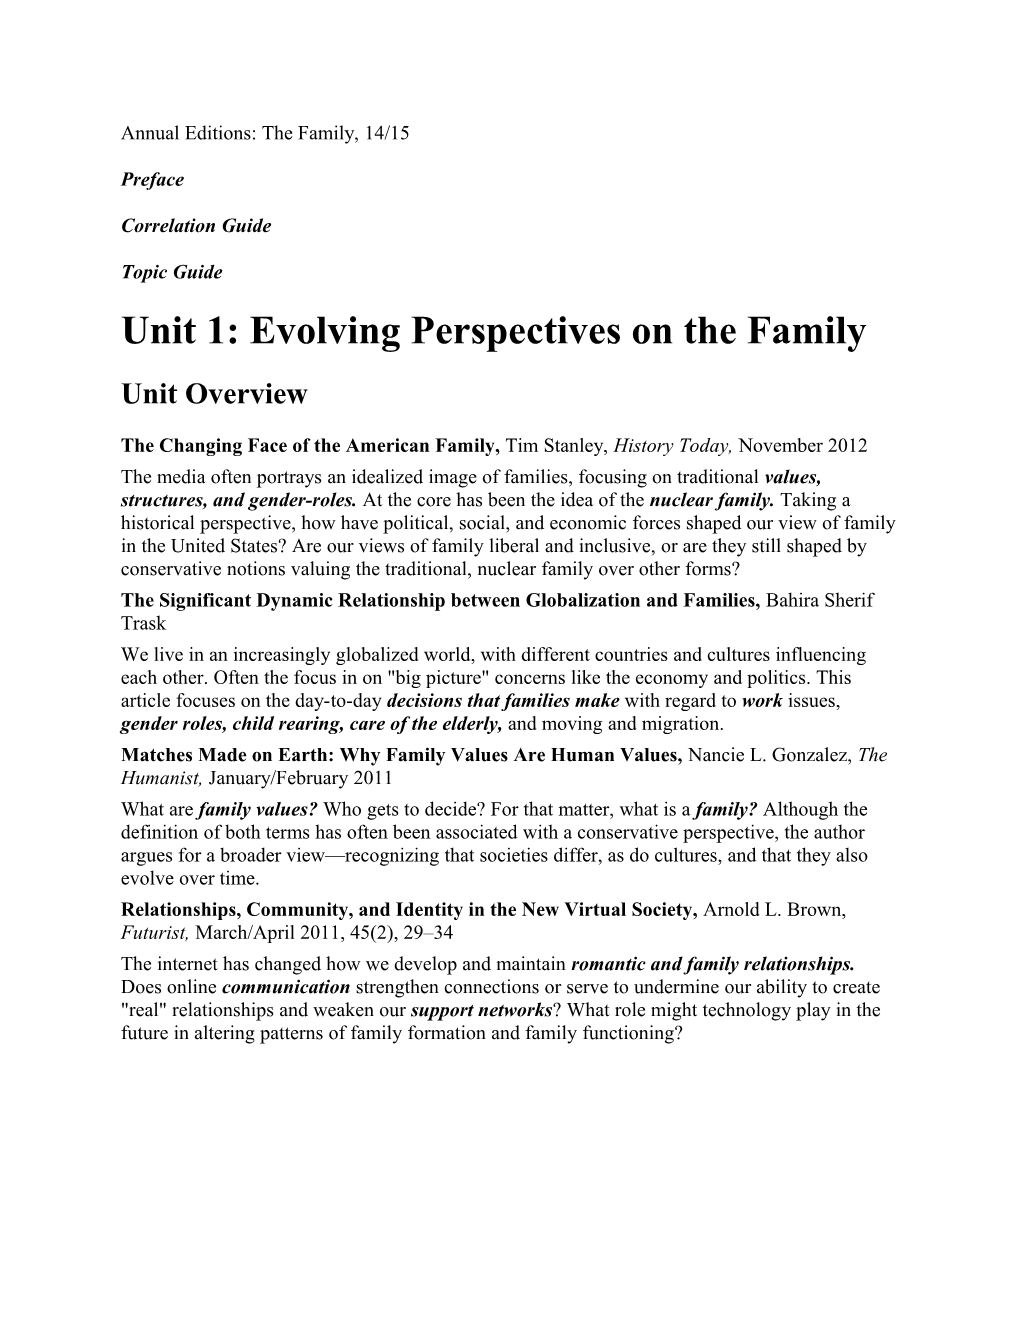 Unit 1: Evolving Perspectives on the Family